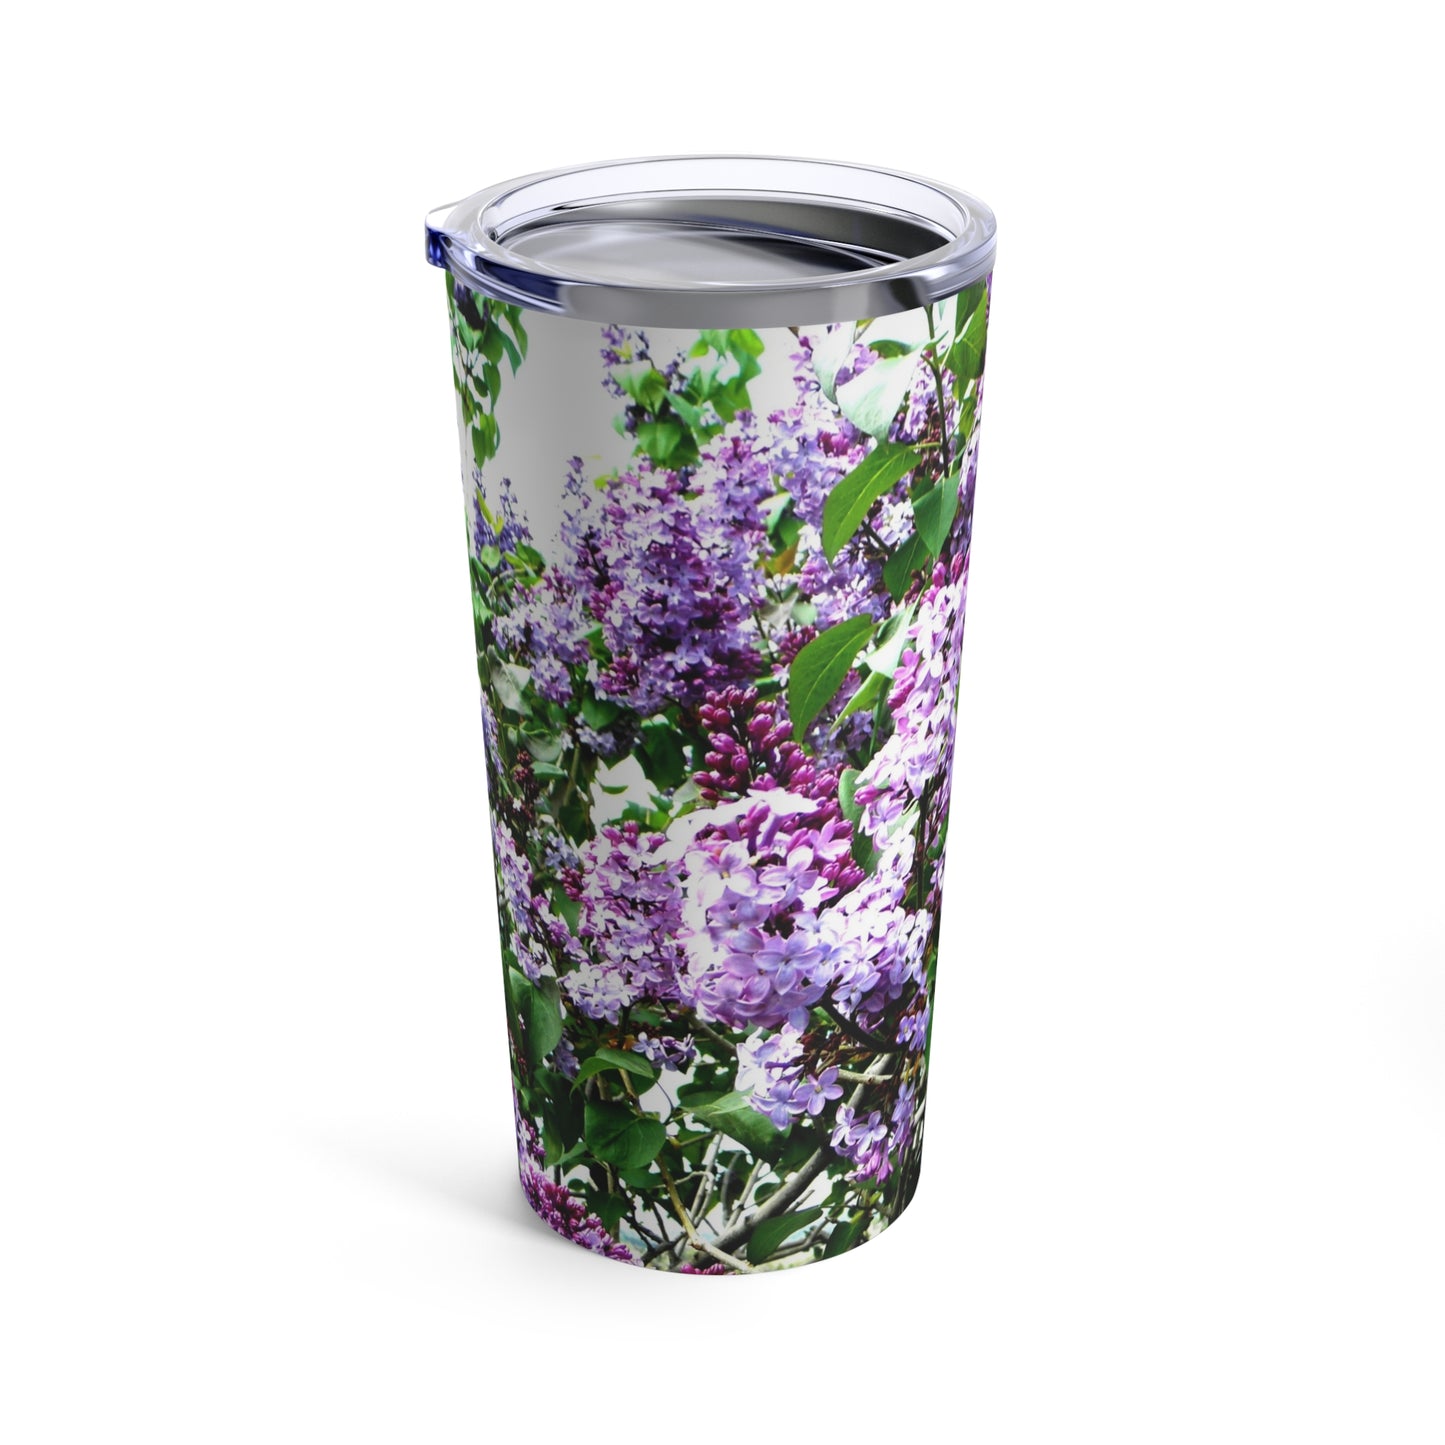 A Printify Purple Lilacs Tumbler: 20 oz.; Stainless steel; Insulated